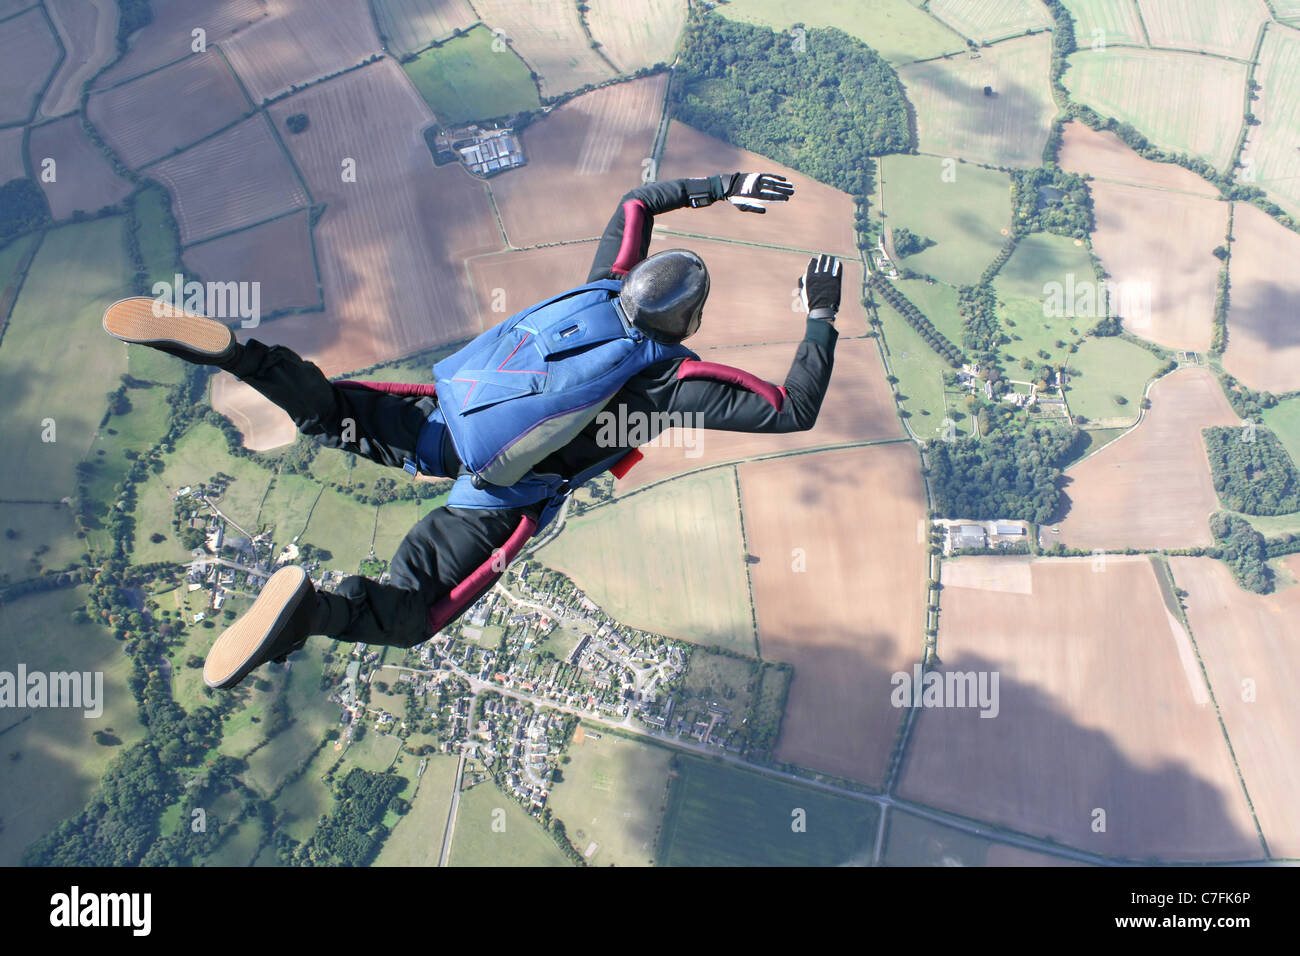 Solo skydiver from above Stock Photo